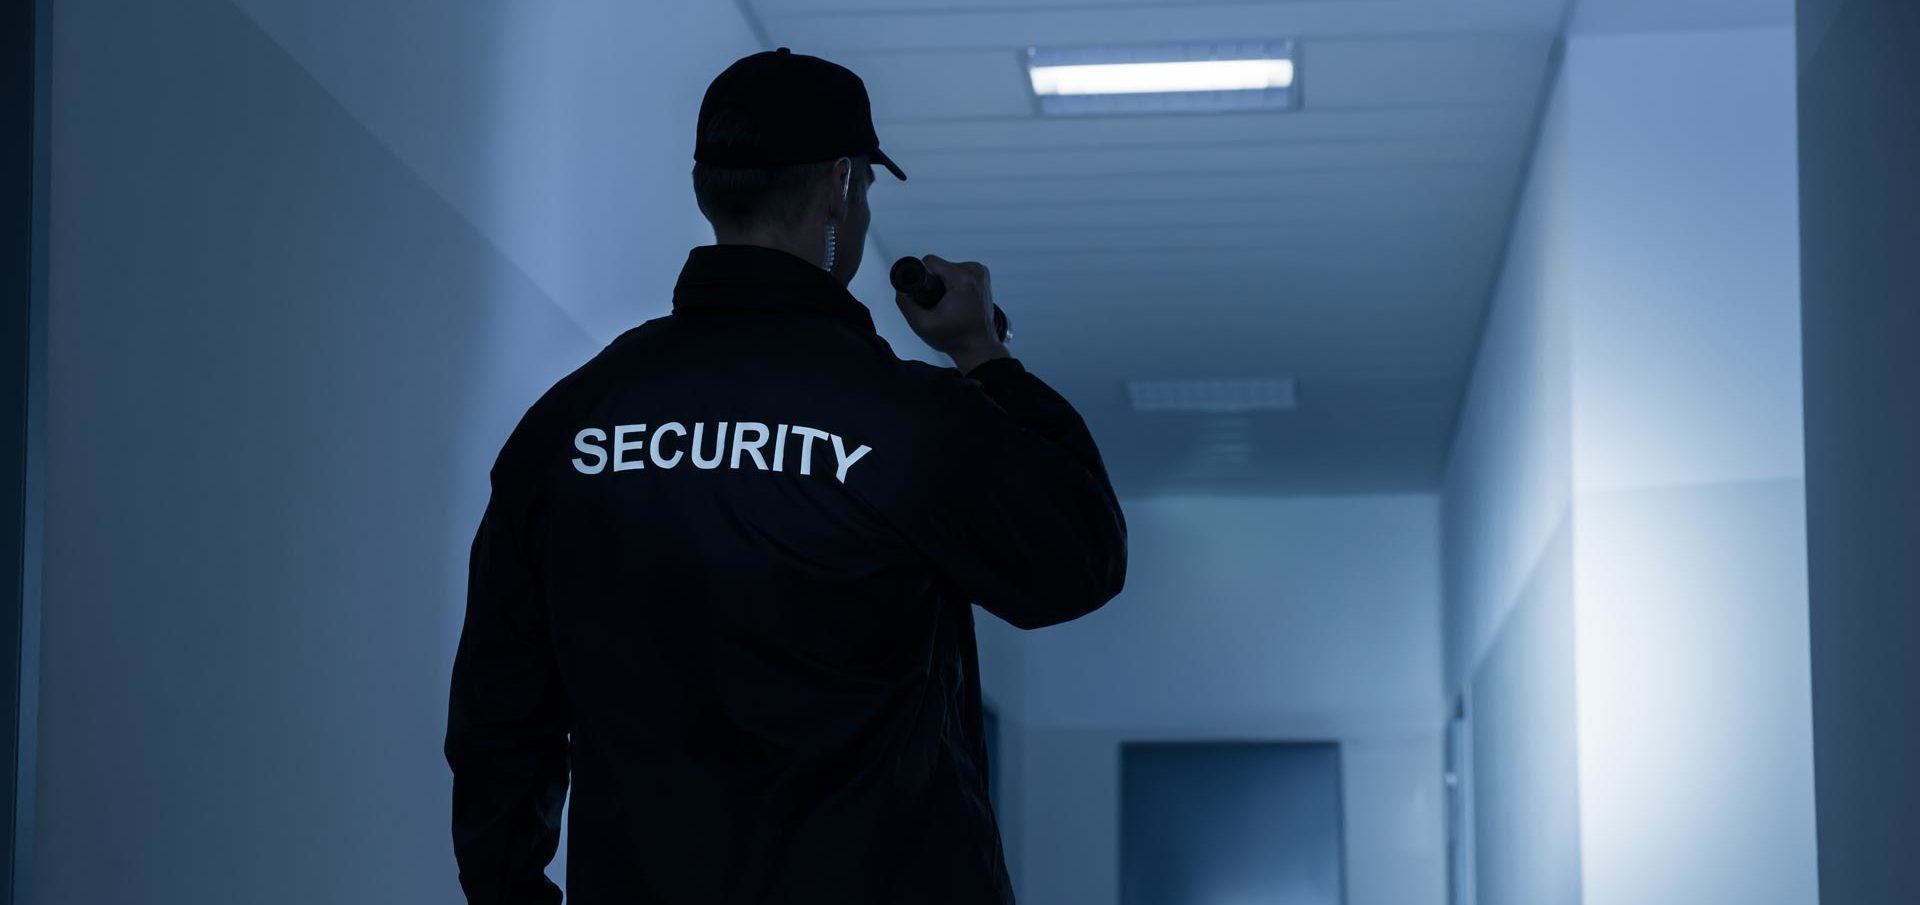 A security worker holding a torch